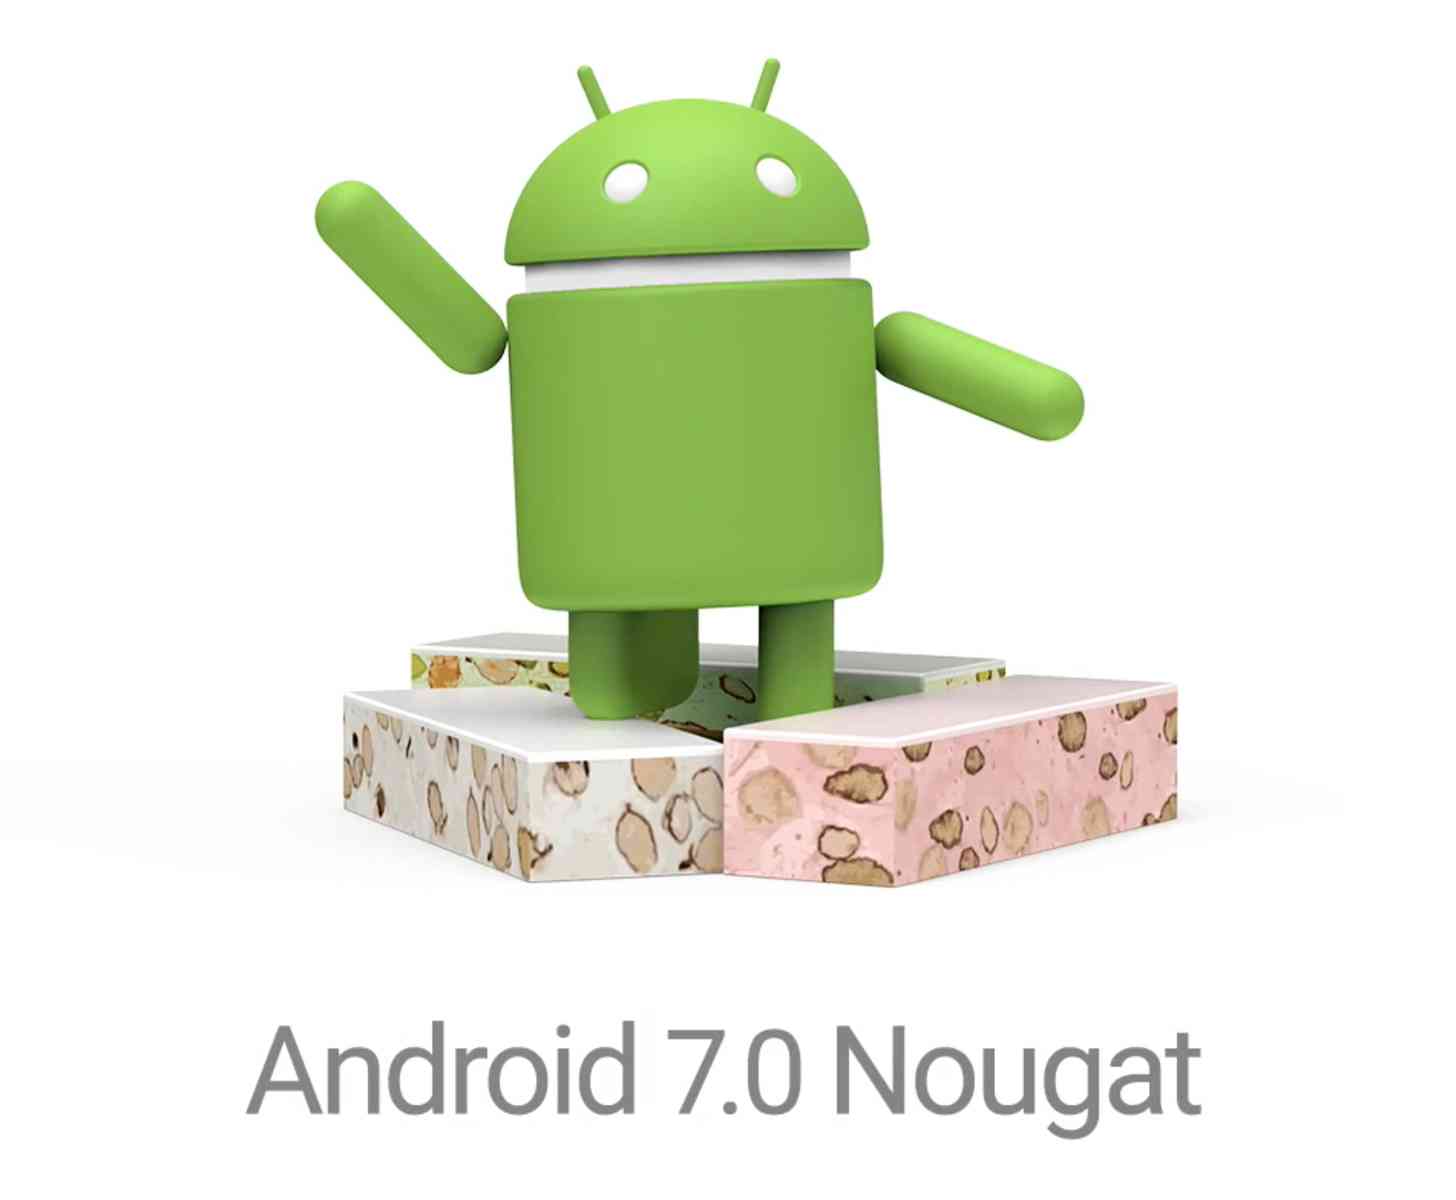 Android 7.0 Nougat logo official